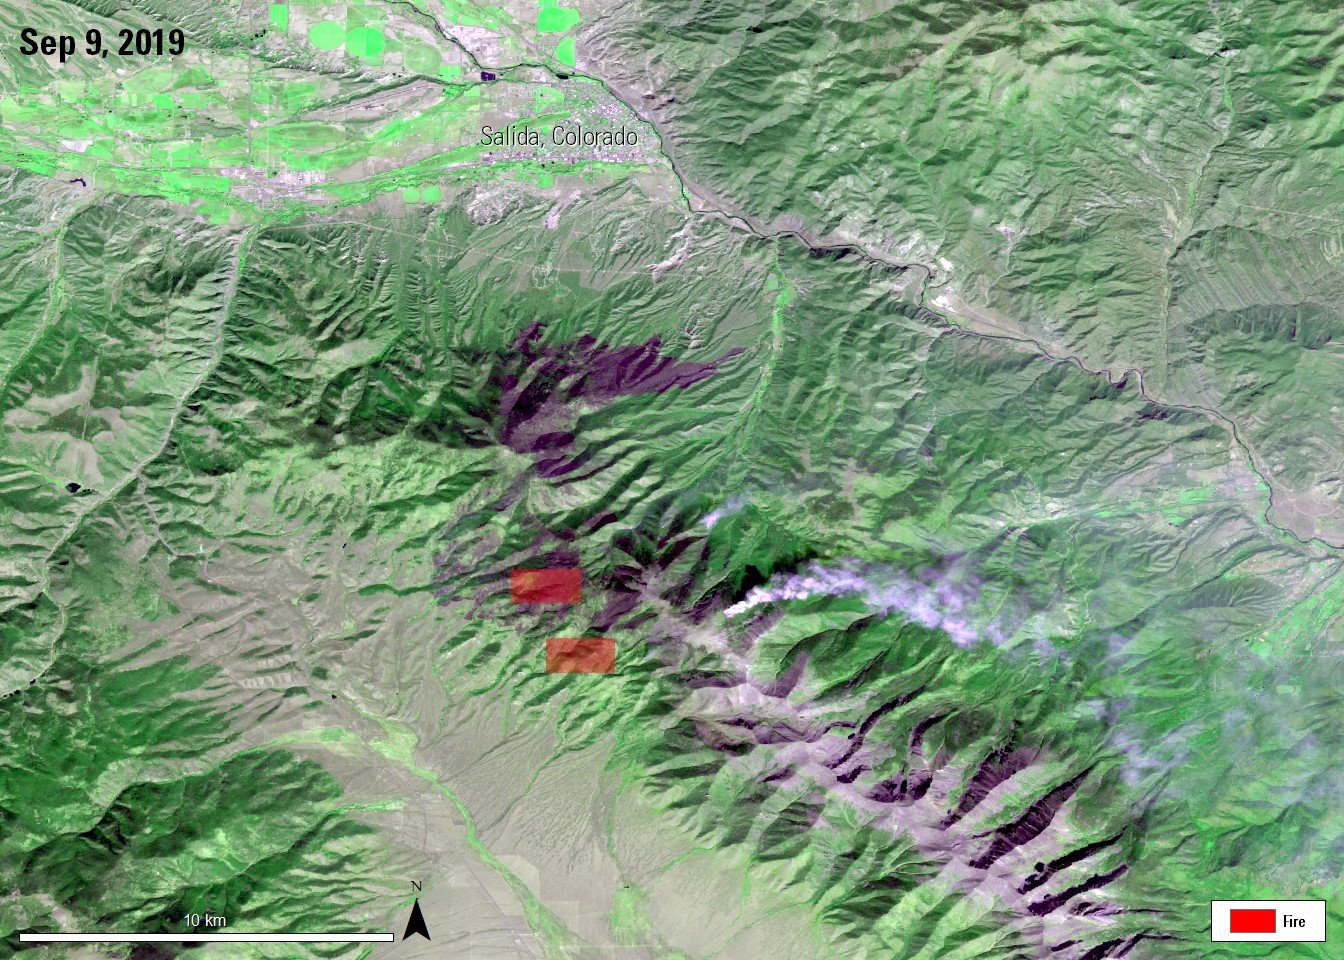 VNP14 product from Sep 9, 2019 overlaid on AST_L1T image of Decker Fire near Salida, Colorado, acquired on October 12, 2019.